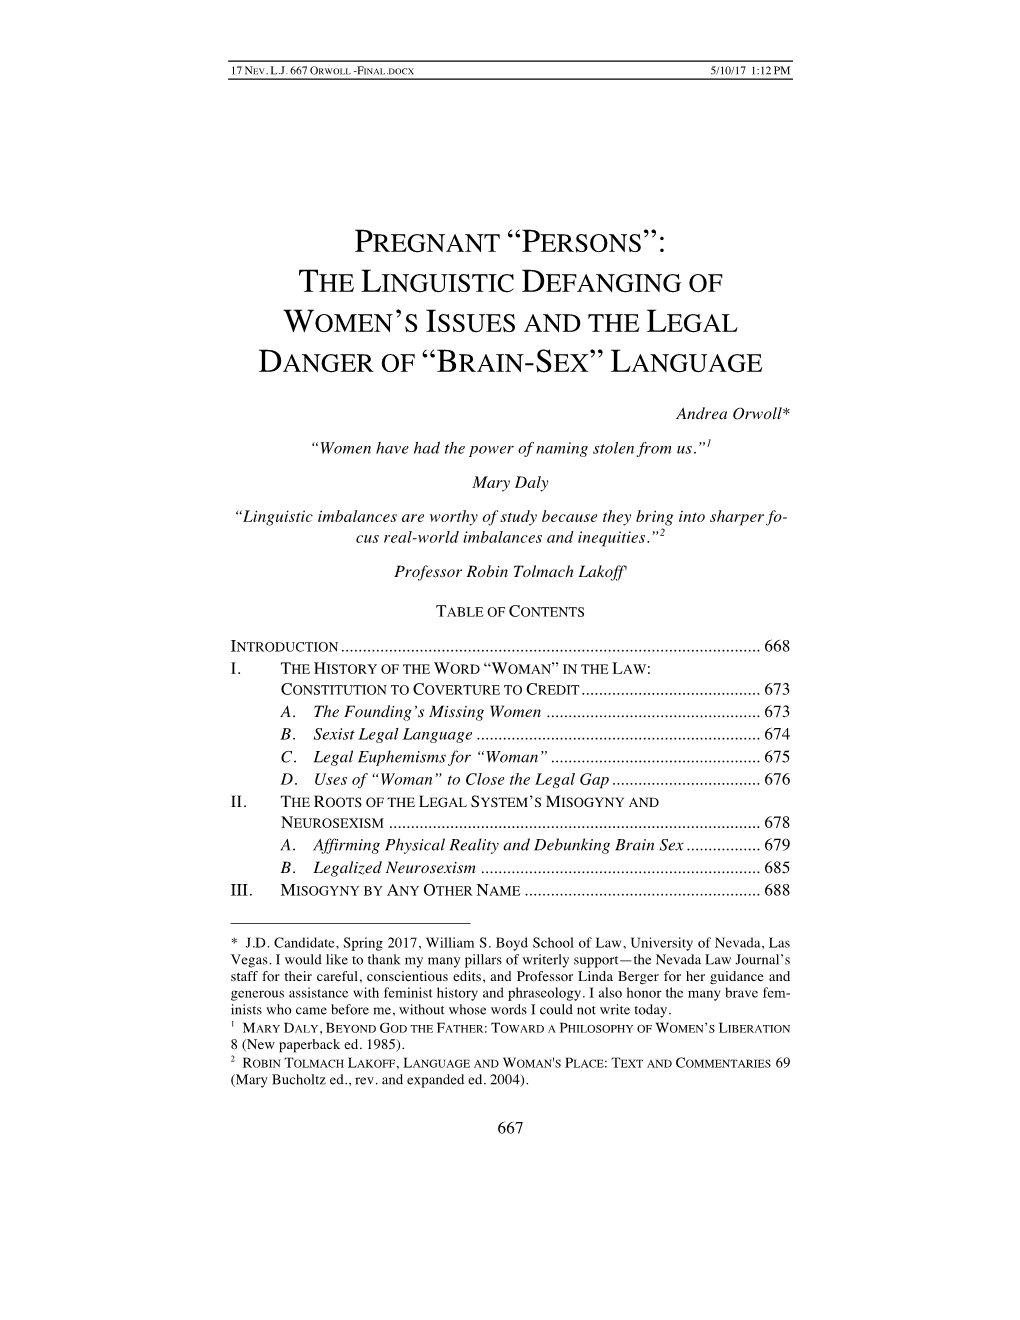 The Linguistic Defanging of Women's Issues and the Legal Danger Of